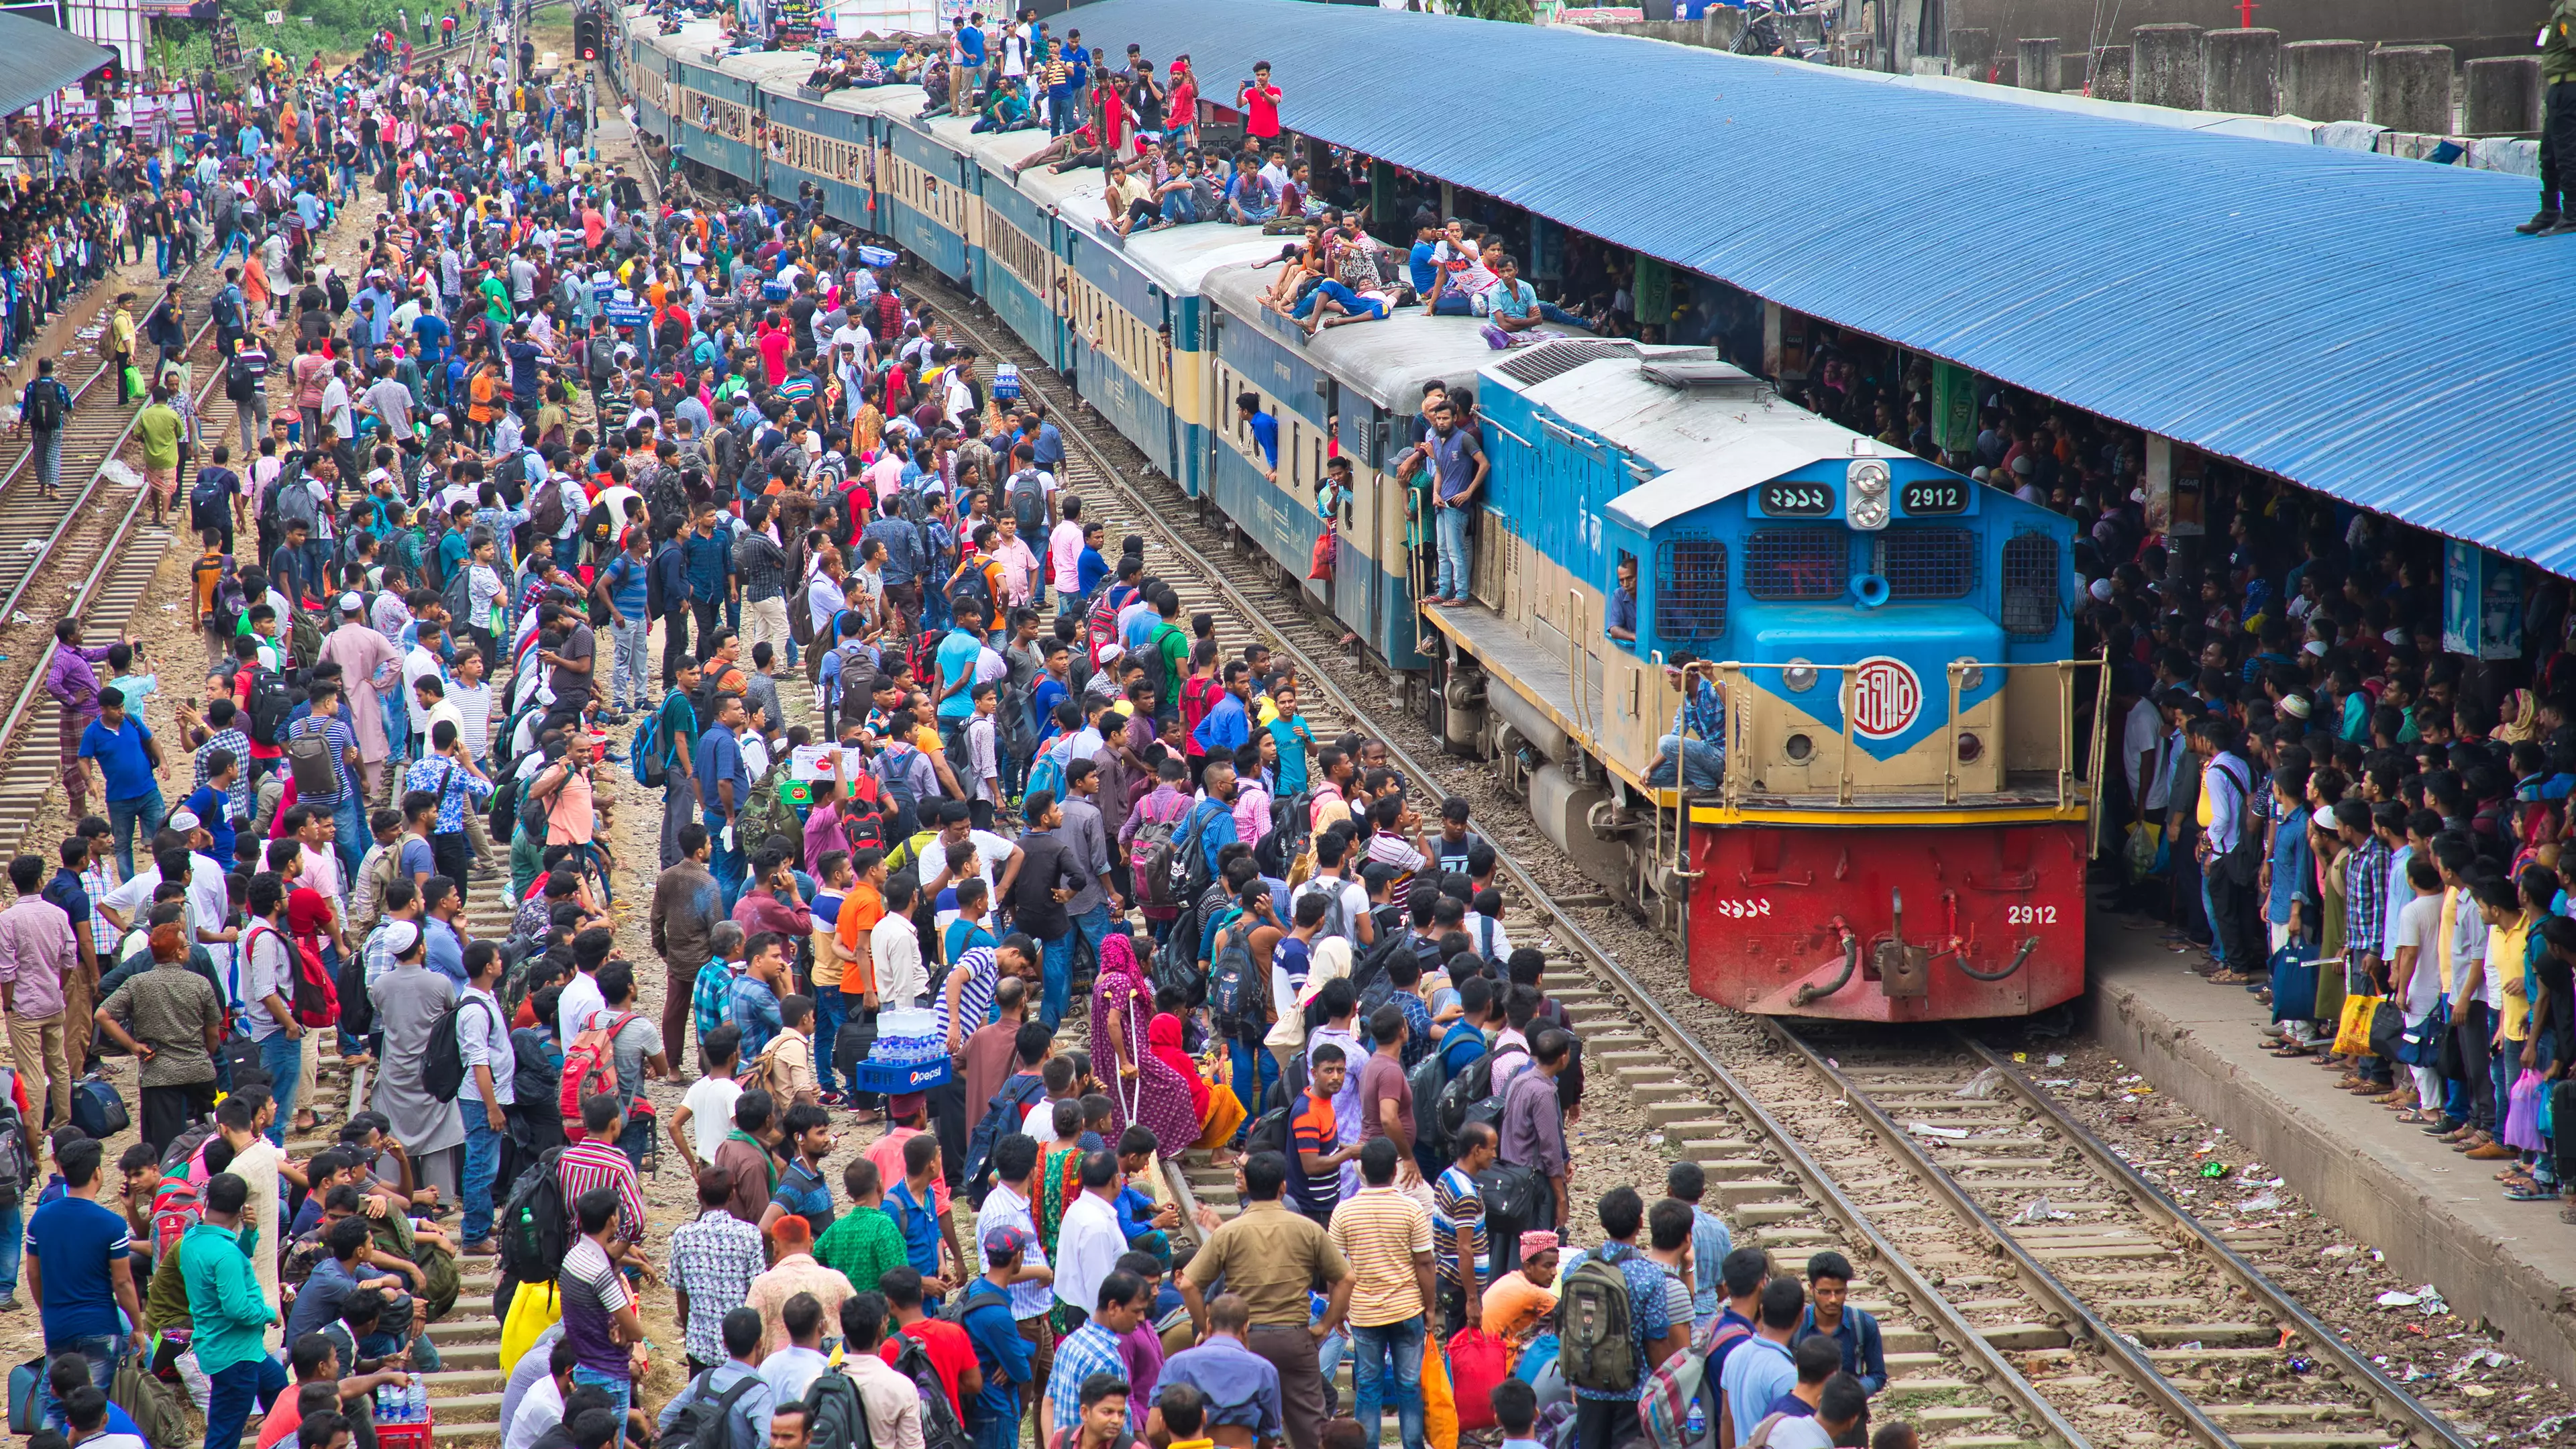 Video Footage Shows People Surfing On Top Of Trains In Bangladesh